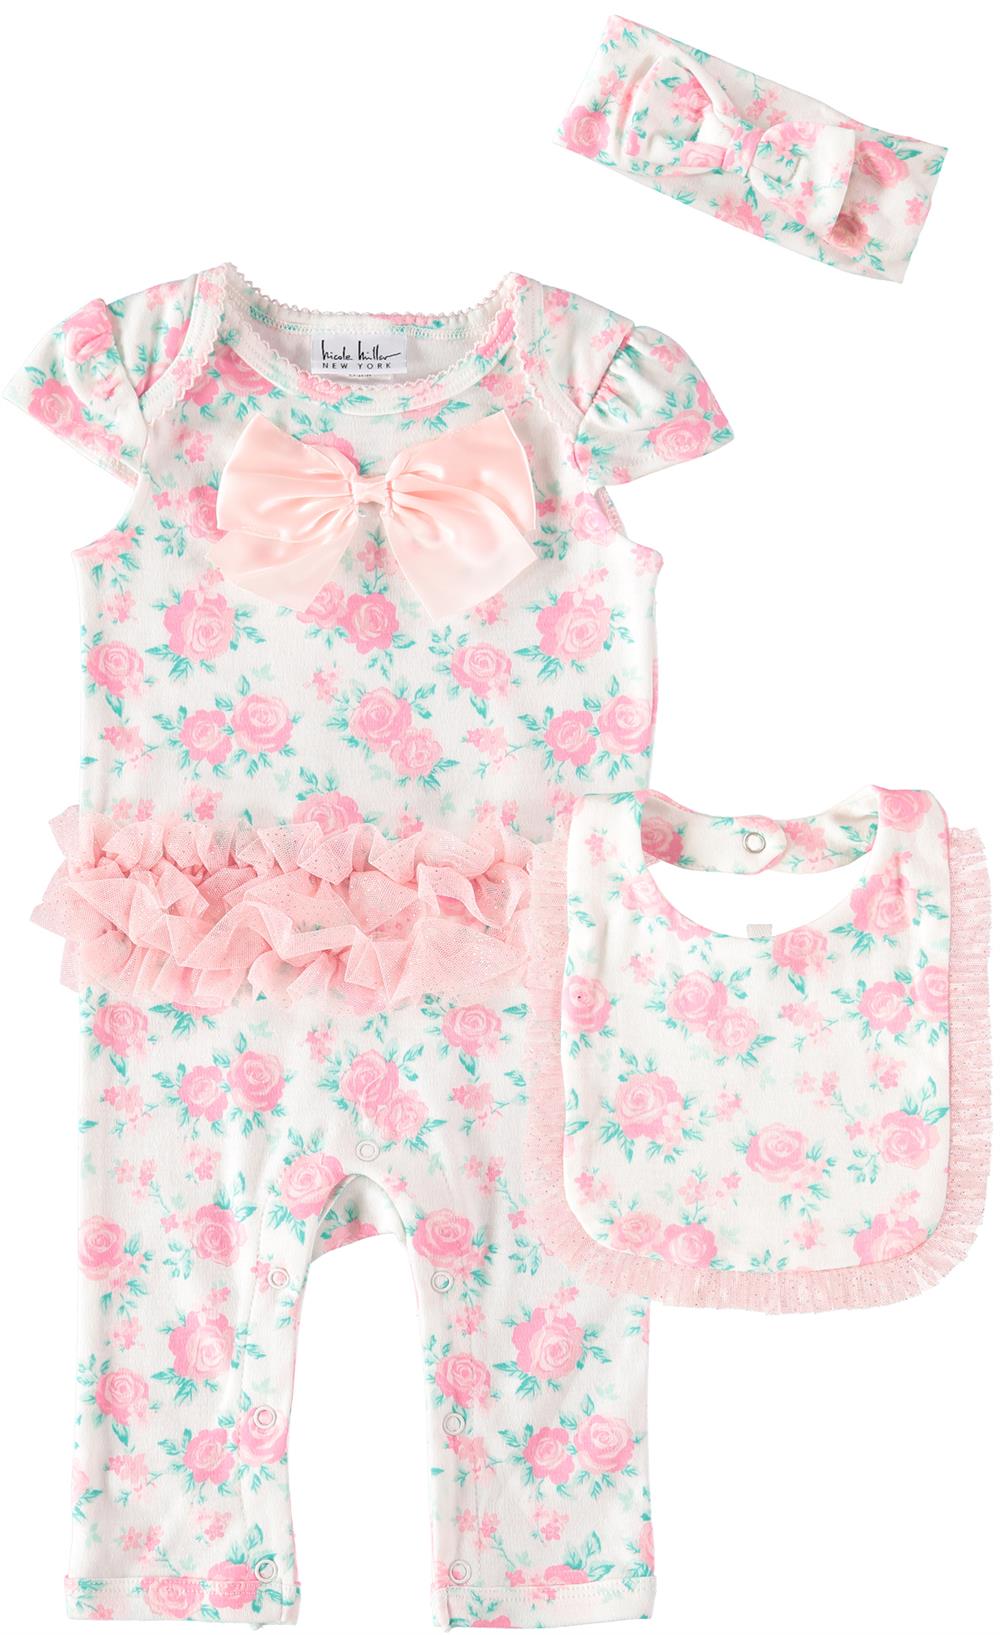 Nicole Miller Girls 0-9 Months 3-Piece Bow Coverall Set